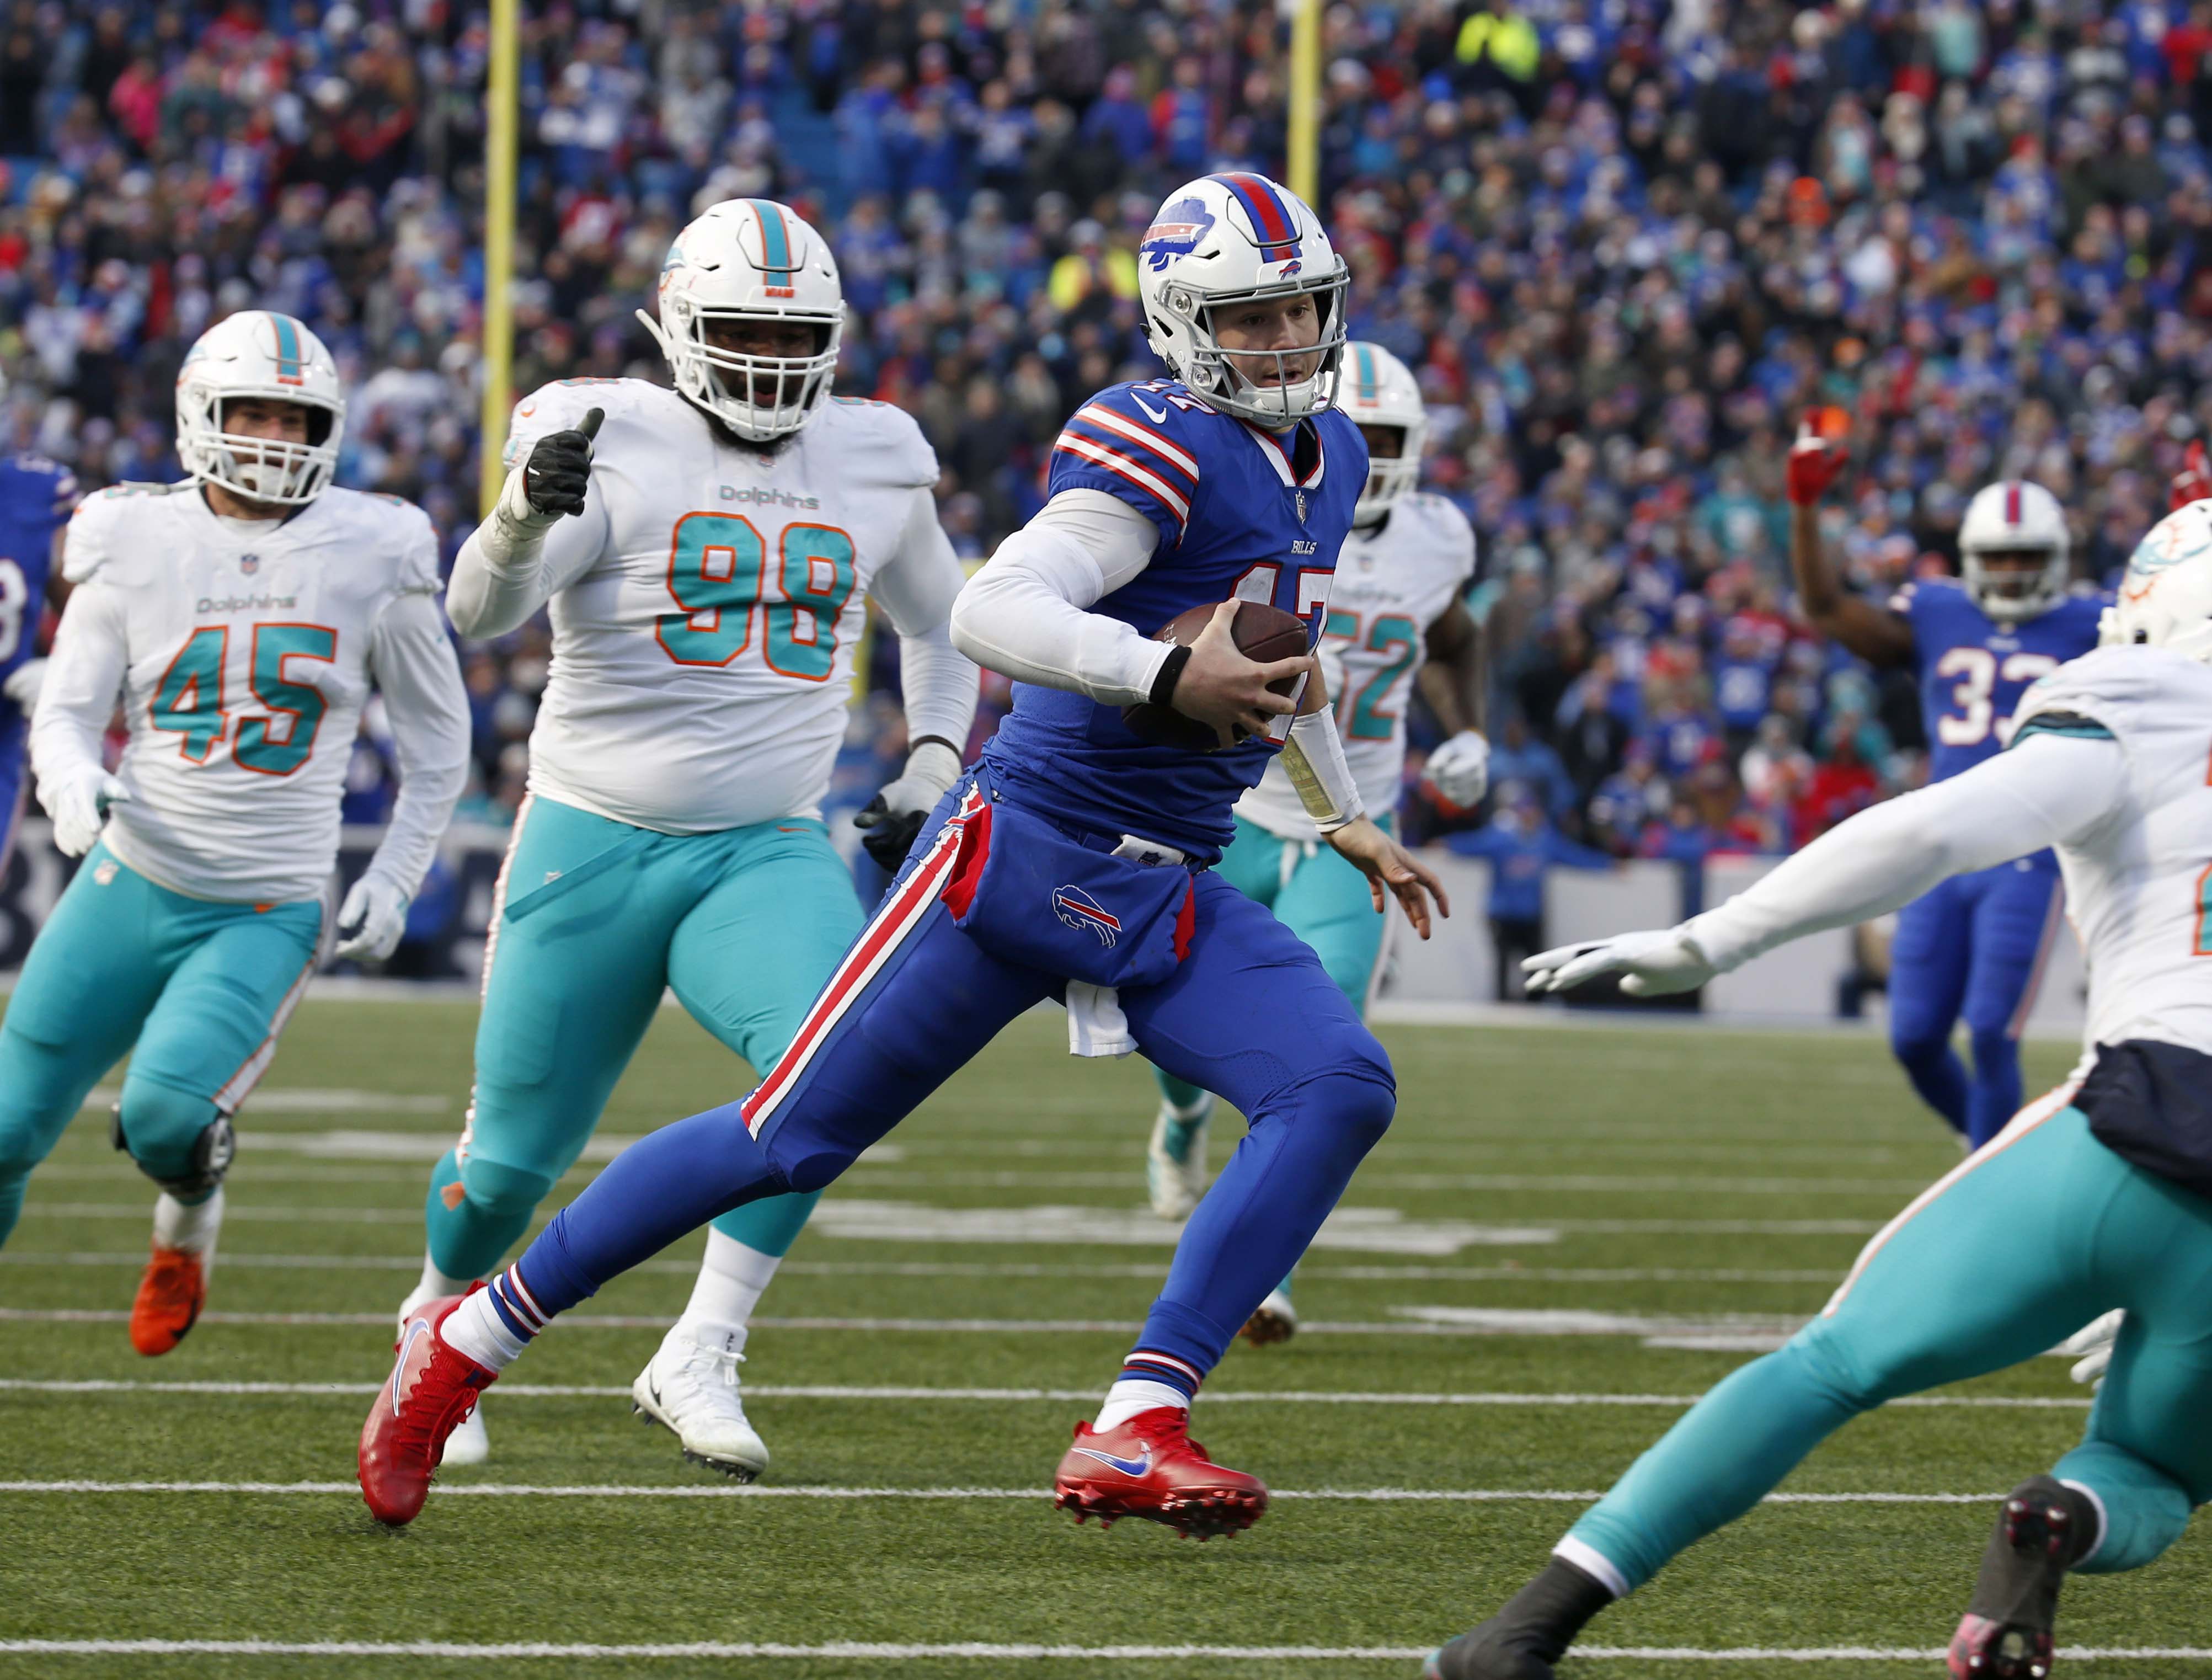 5 storylines to watch during Buffalo Bills vs. Miami Dolphins